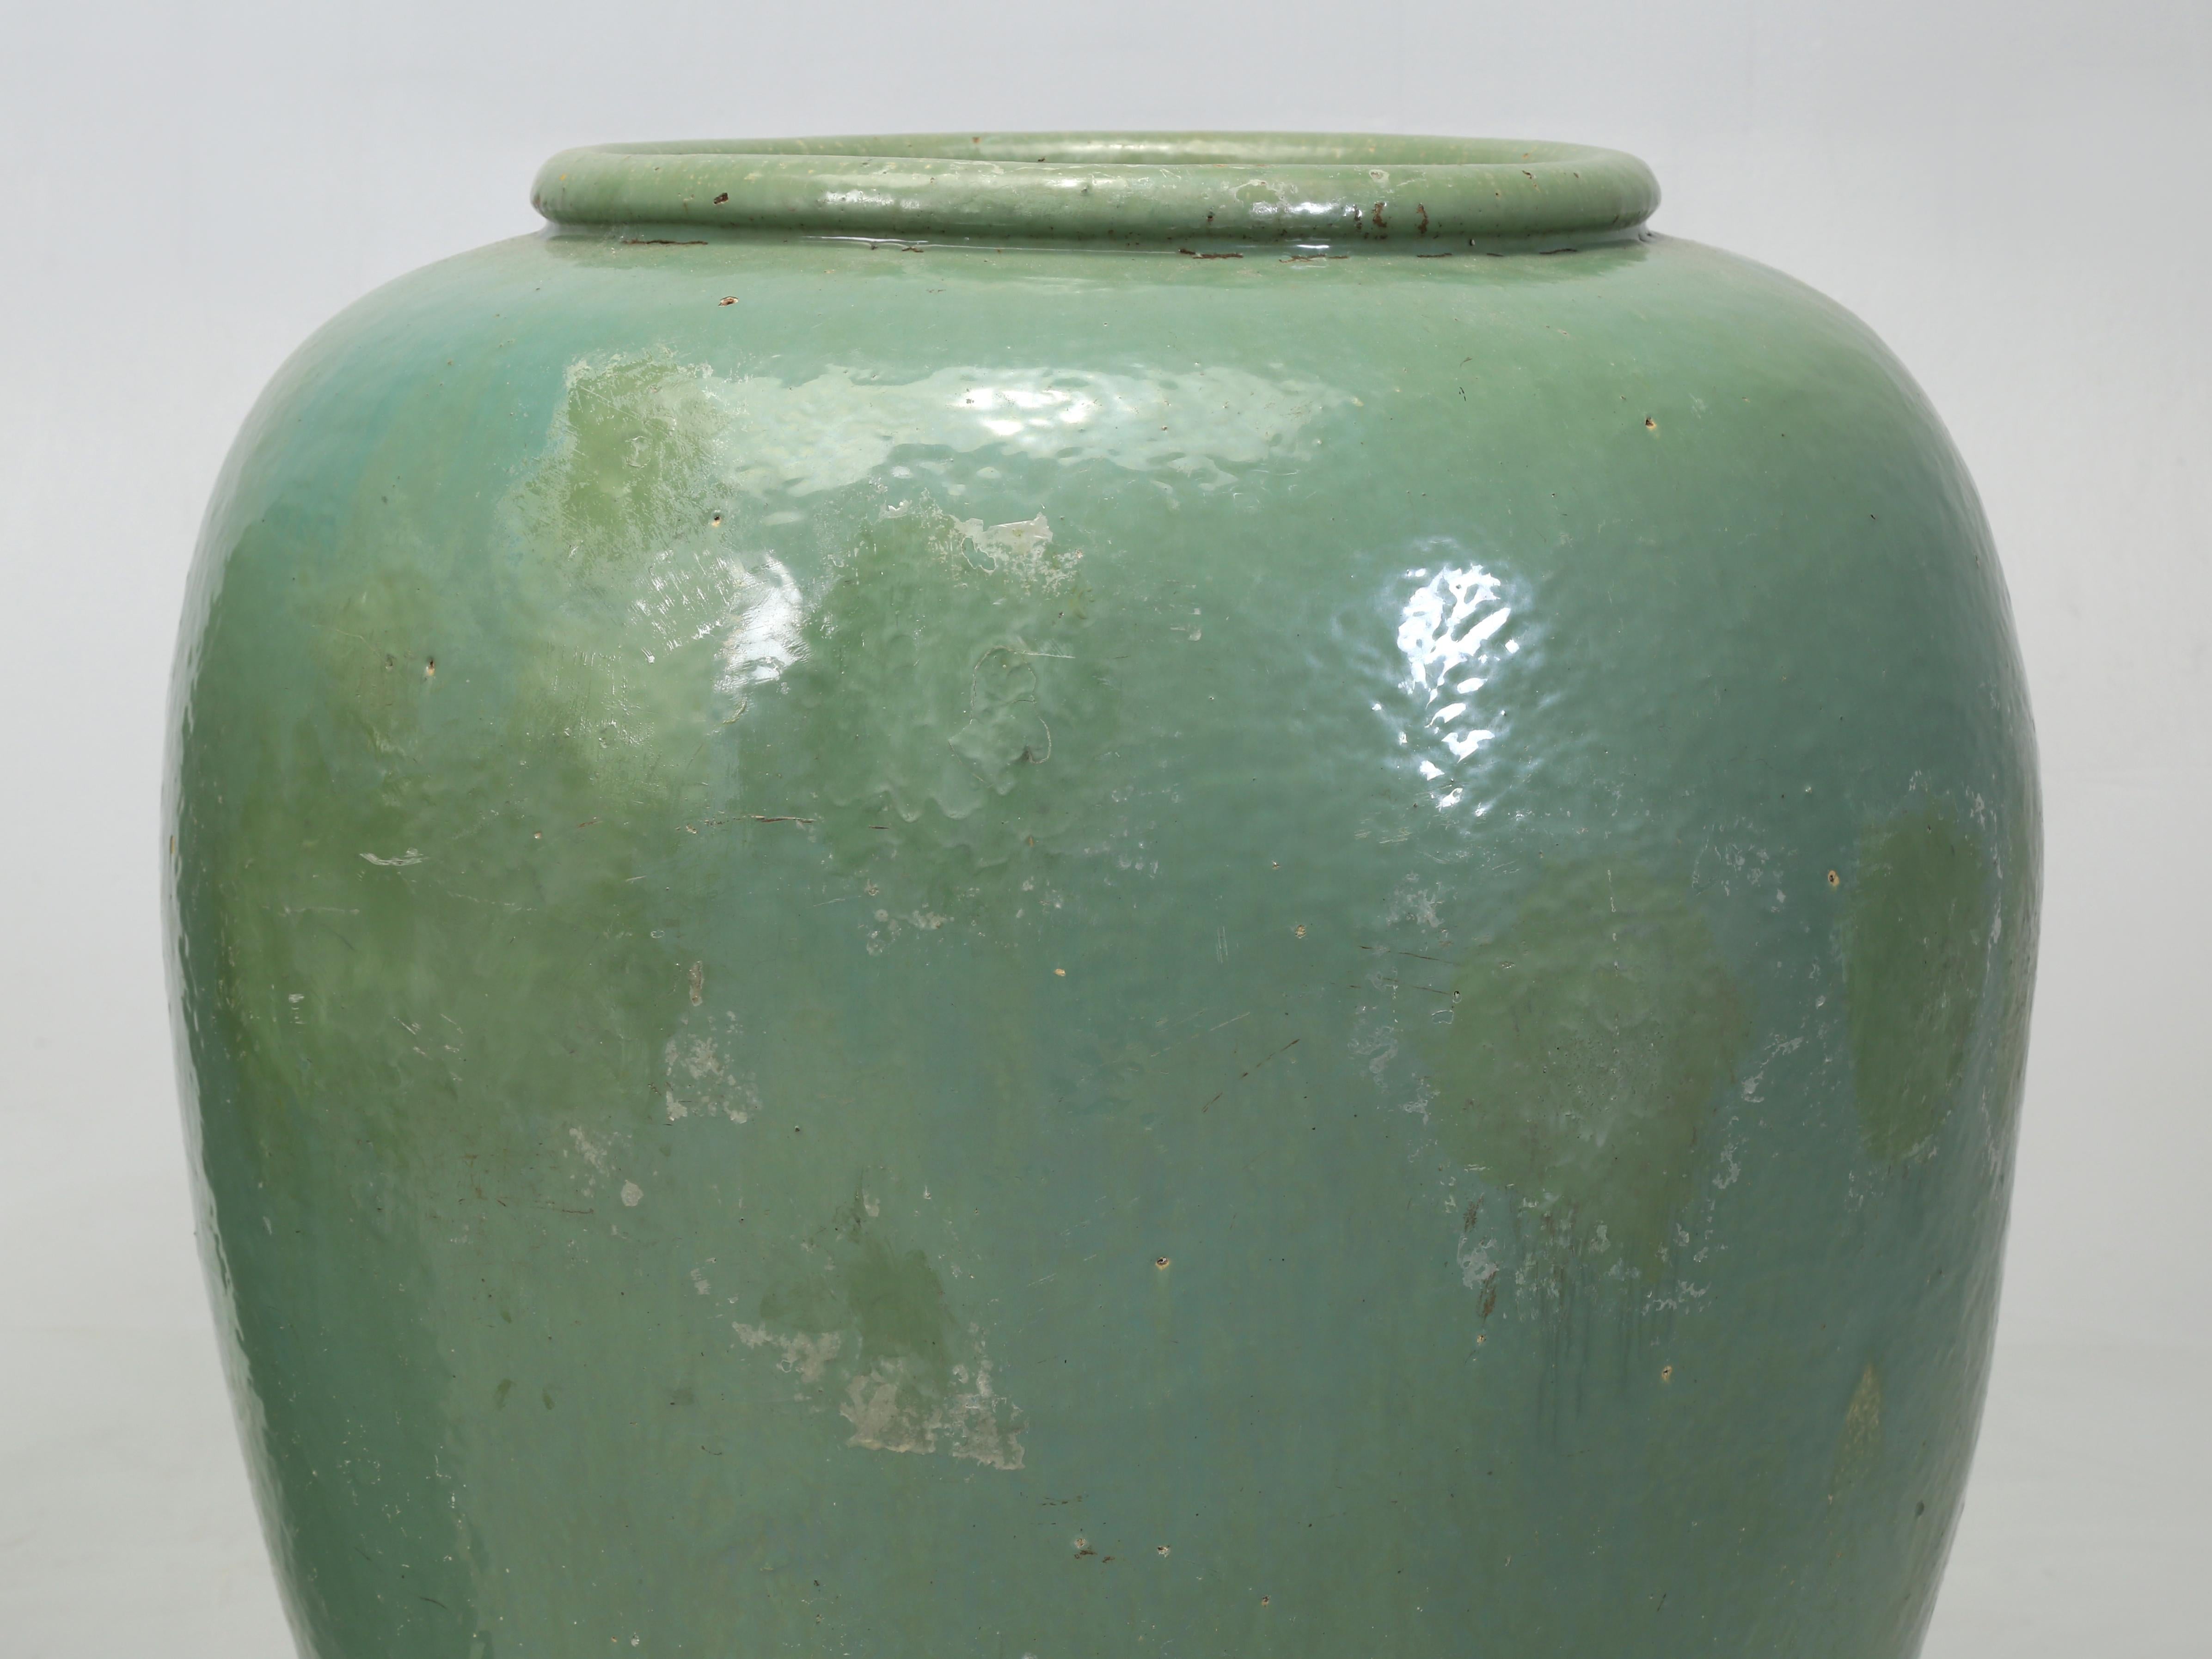 Glazed Green Vintage Garden Planters Imported from Ireland We'd call a Near Pair 10